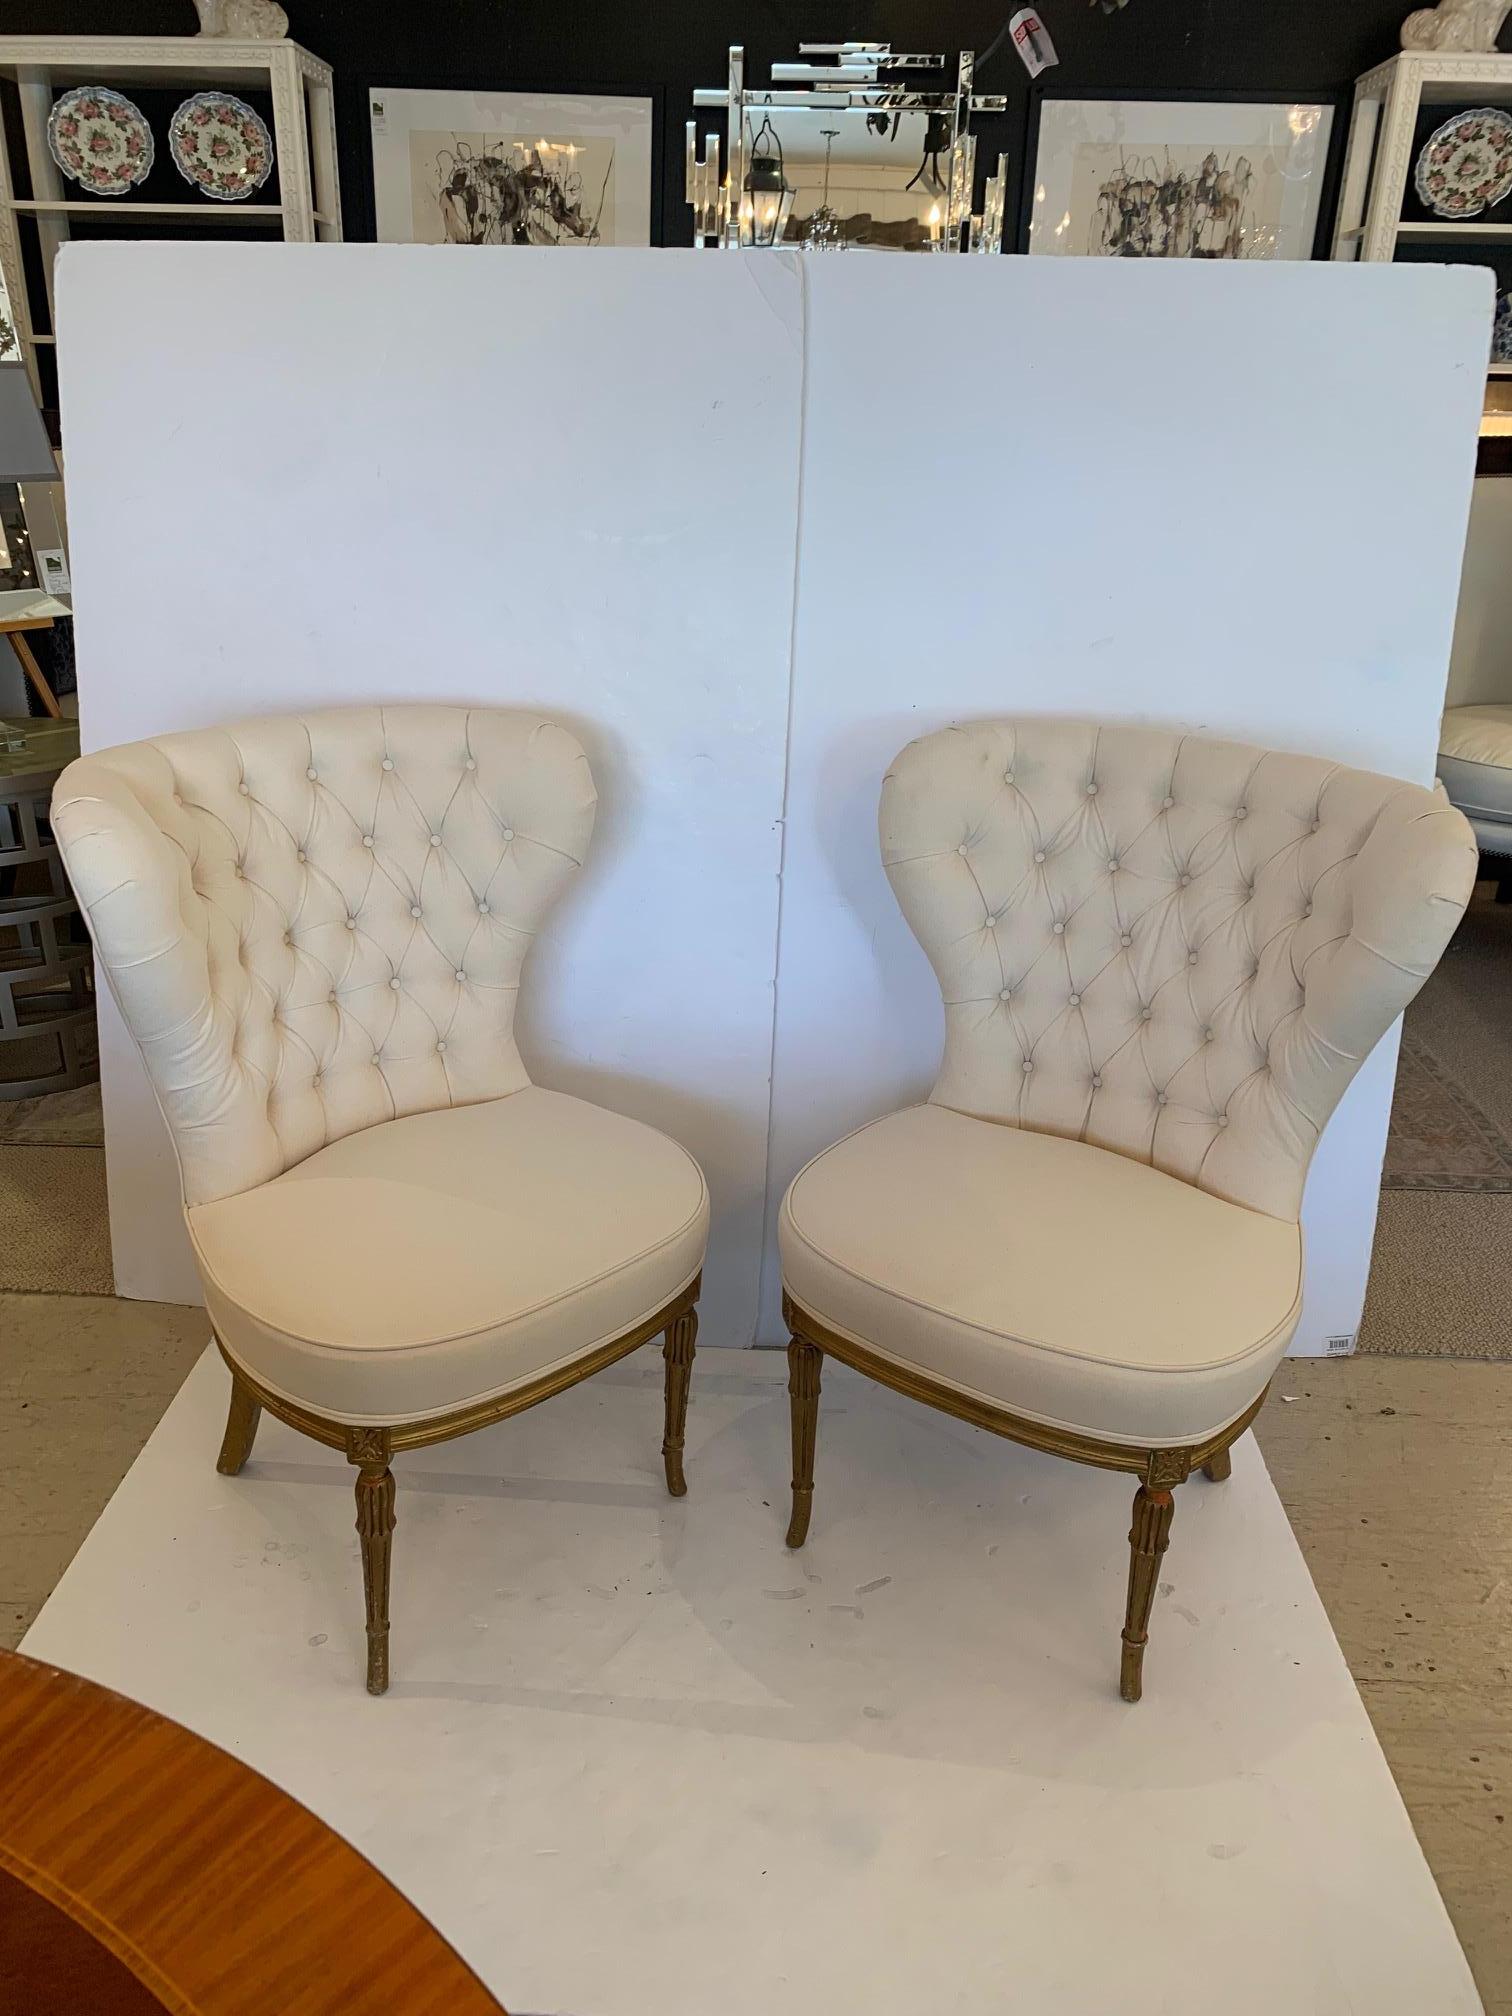 Super glamorous pair of French fan back tufted slipper chairs having wonderfully shaped balloon seats and brand new high quality white duck upholstery. Carved wooden bases have fabulous aged gilding with some original red underpaint showing through